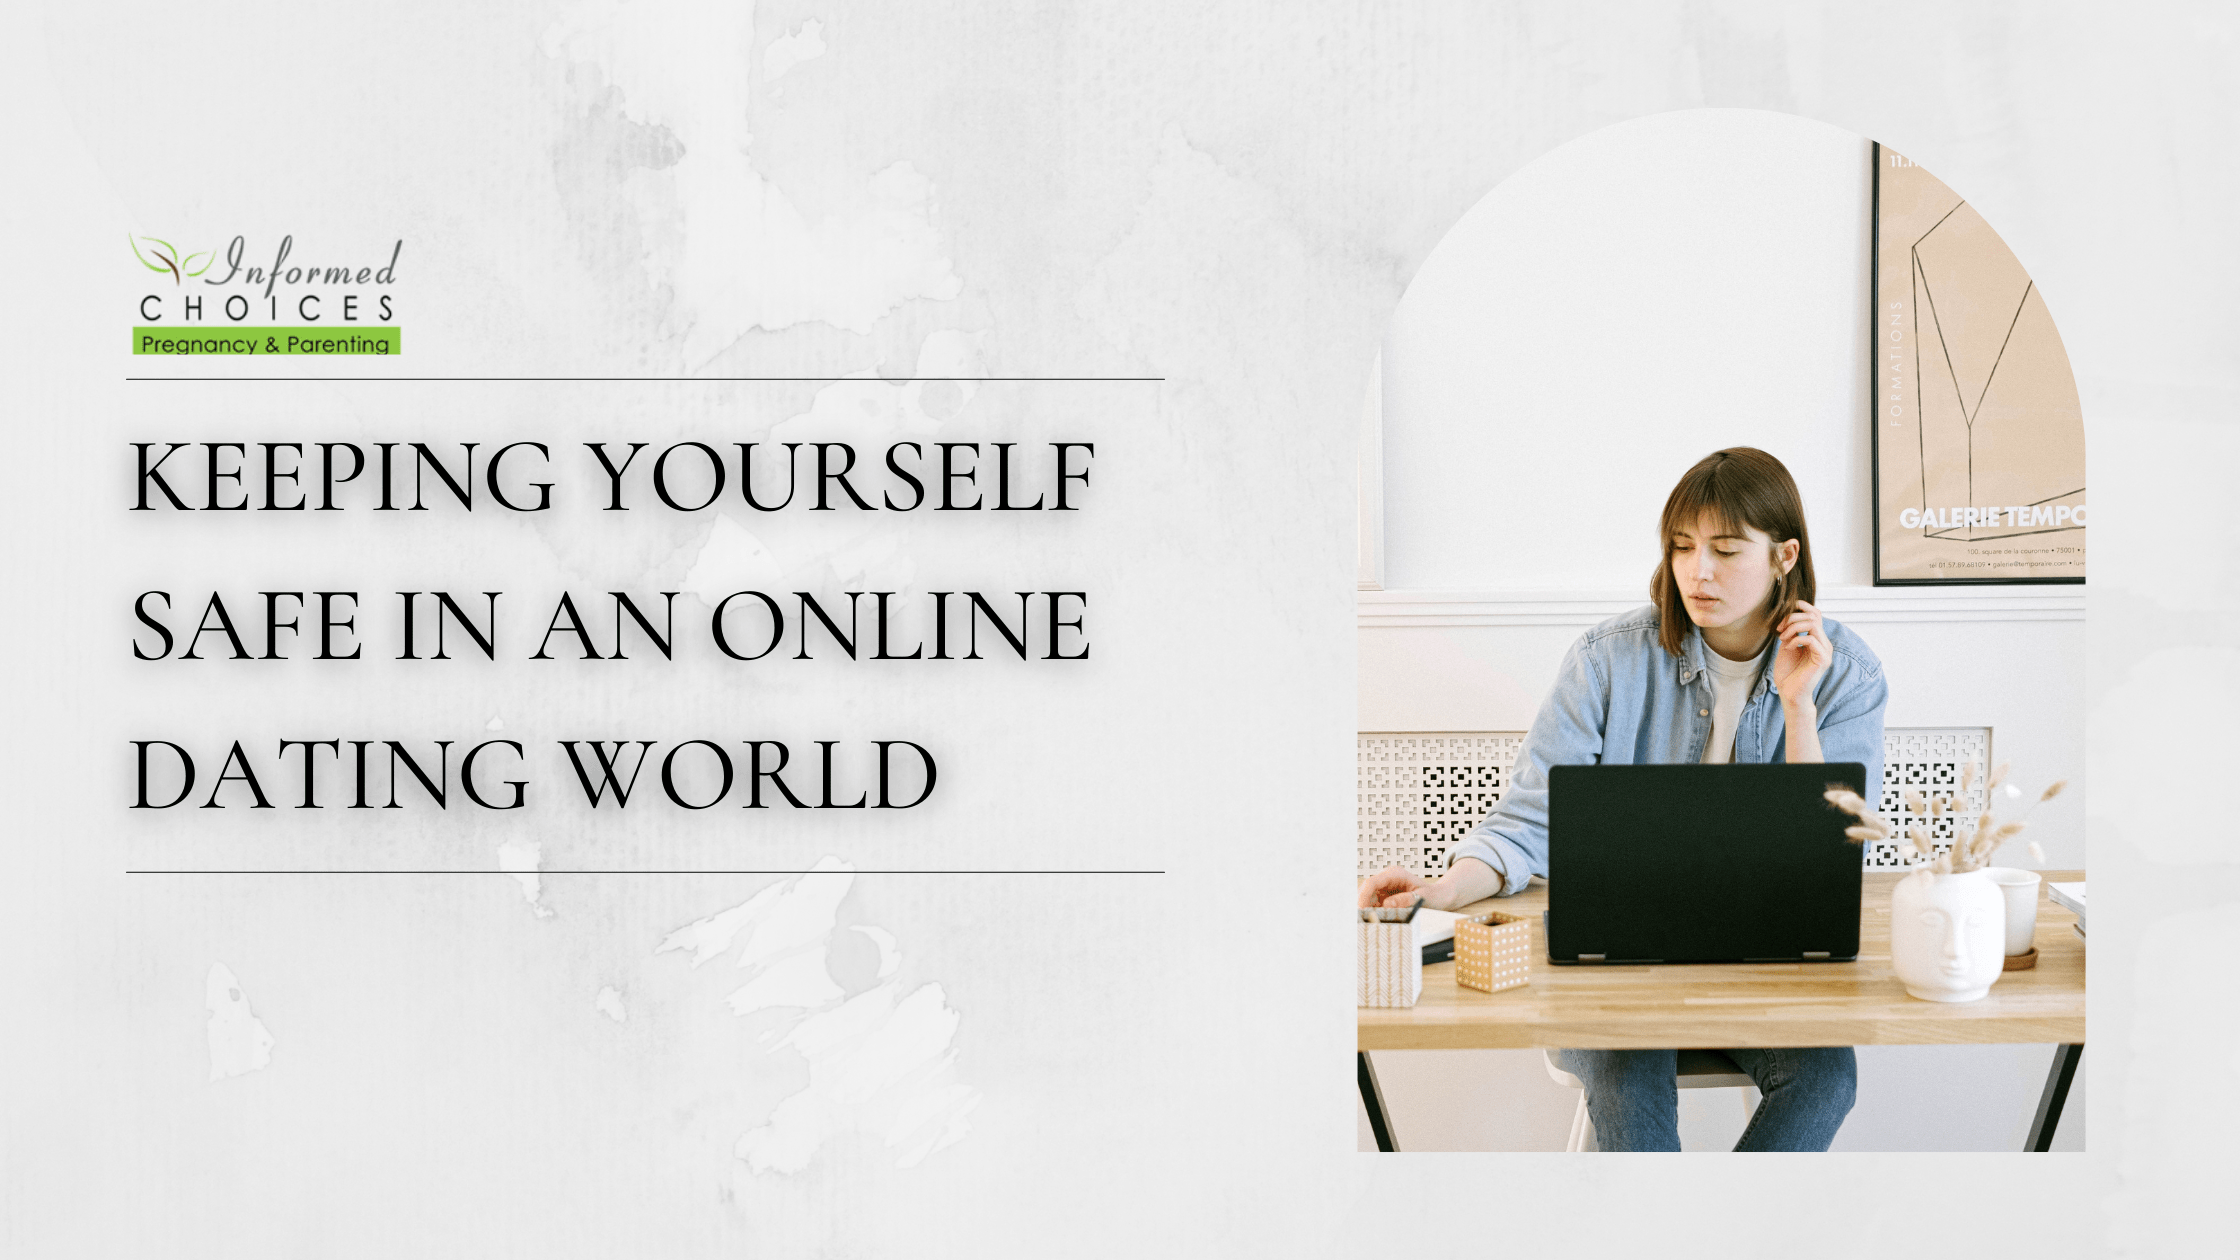 An image of a woman sitting Infront of her laptop, with the title "Keeping Yourself Safe in an Online Dating World" next to her. 